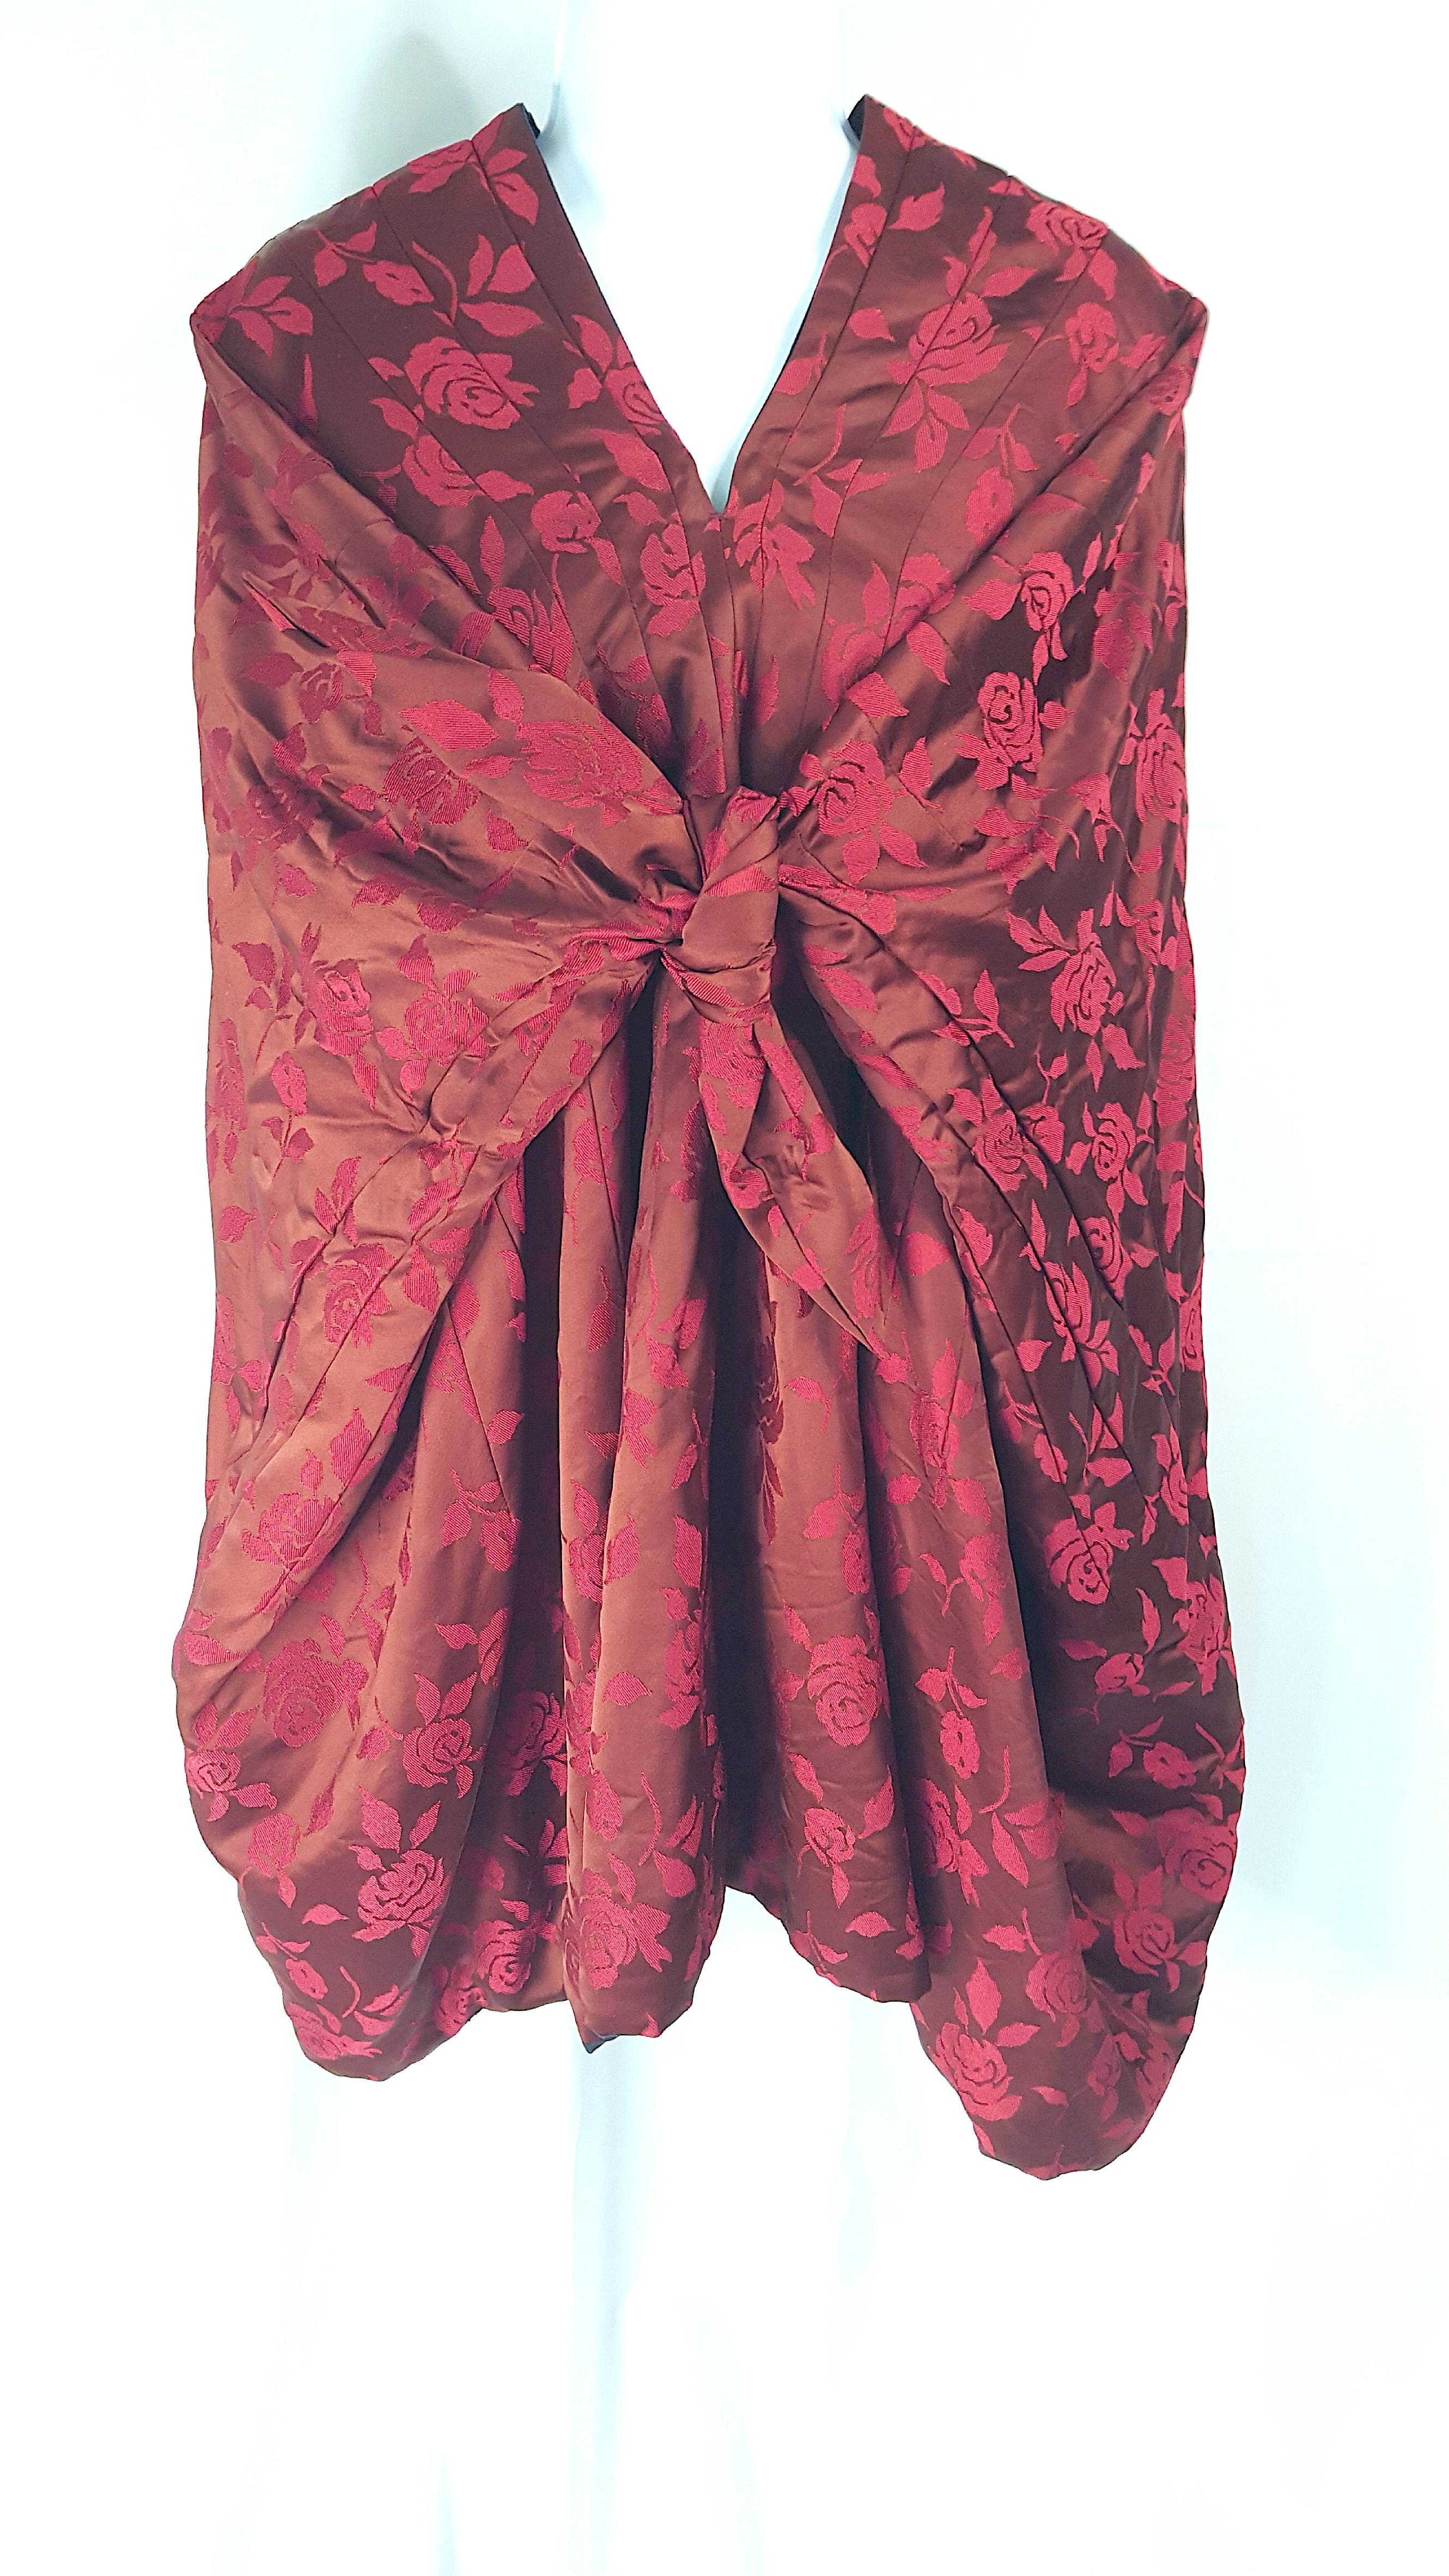 JunyaWantanabe 1996 Convertible Draped RedRoseJacquard & NavyCotton Skirt Cape In Excellent Condition For Sale In Chicago, IL